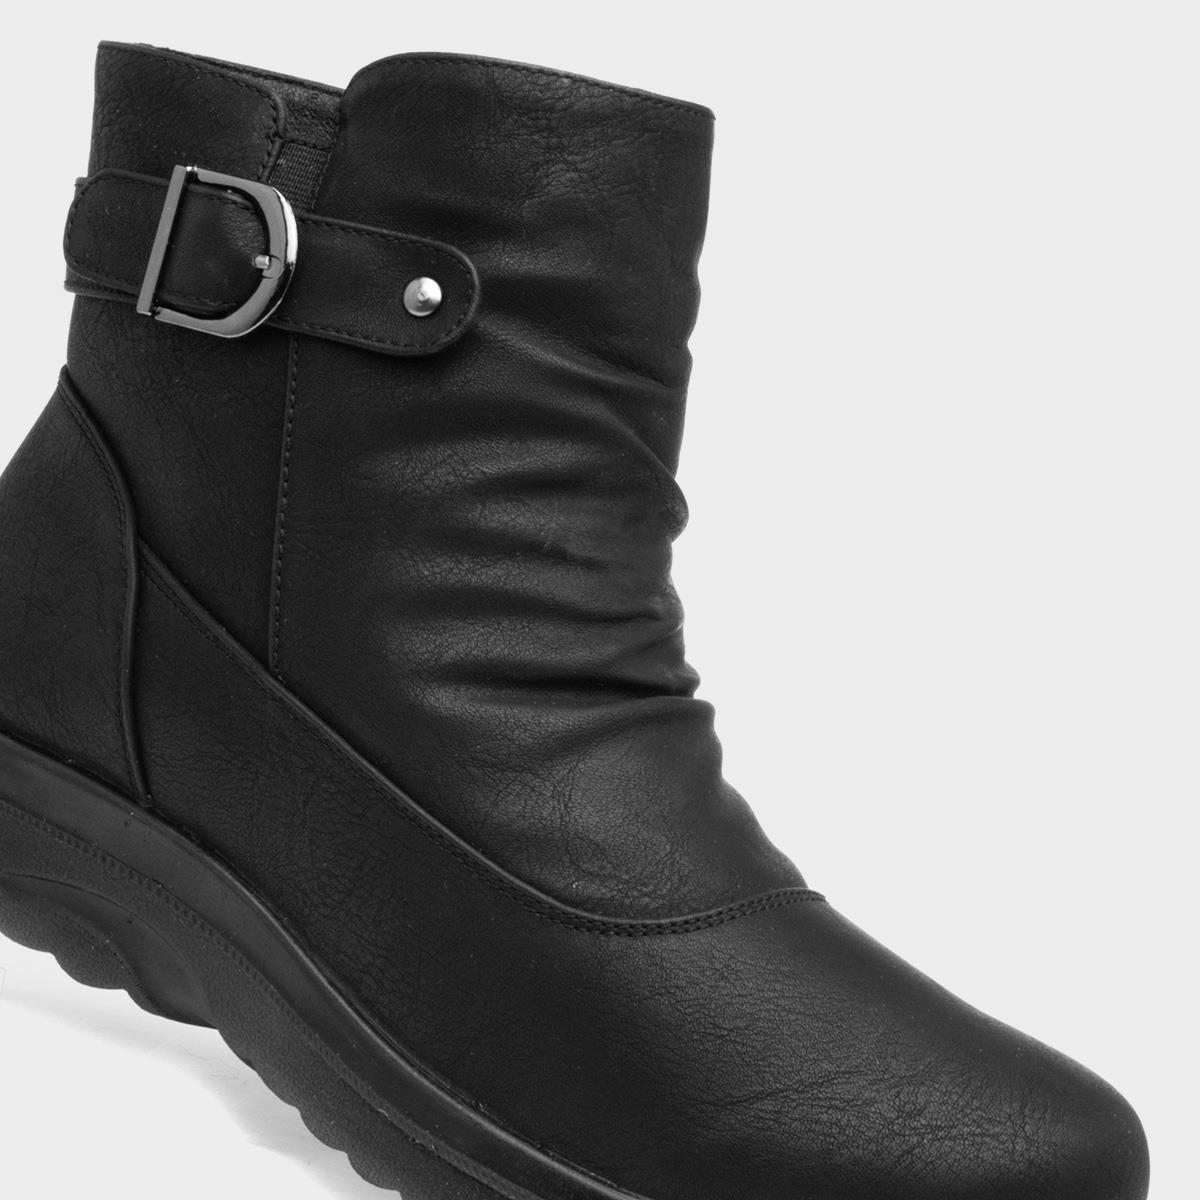 Softlites Jean Womens Black Buckled Ankle Boot-185086 | Shoe Zone